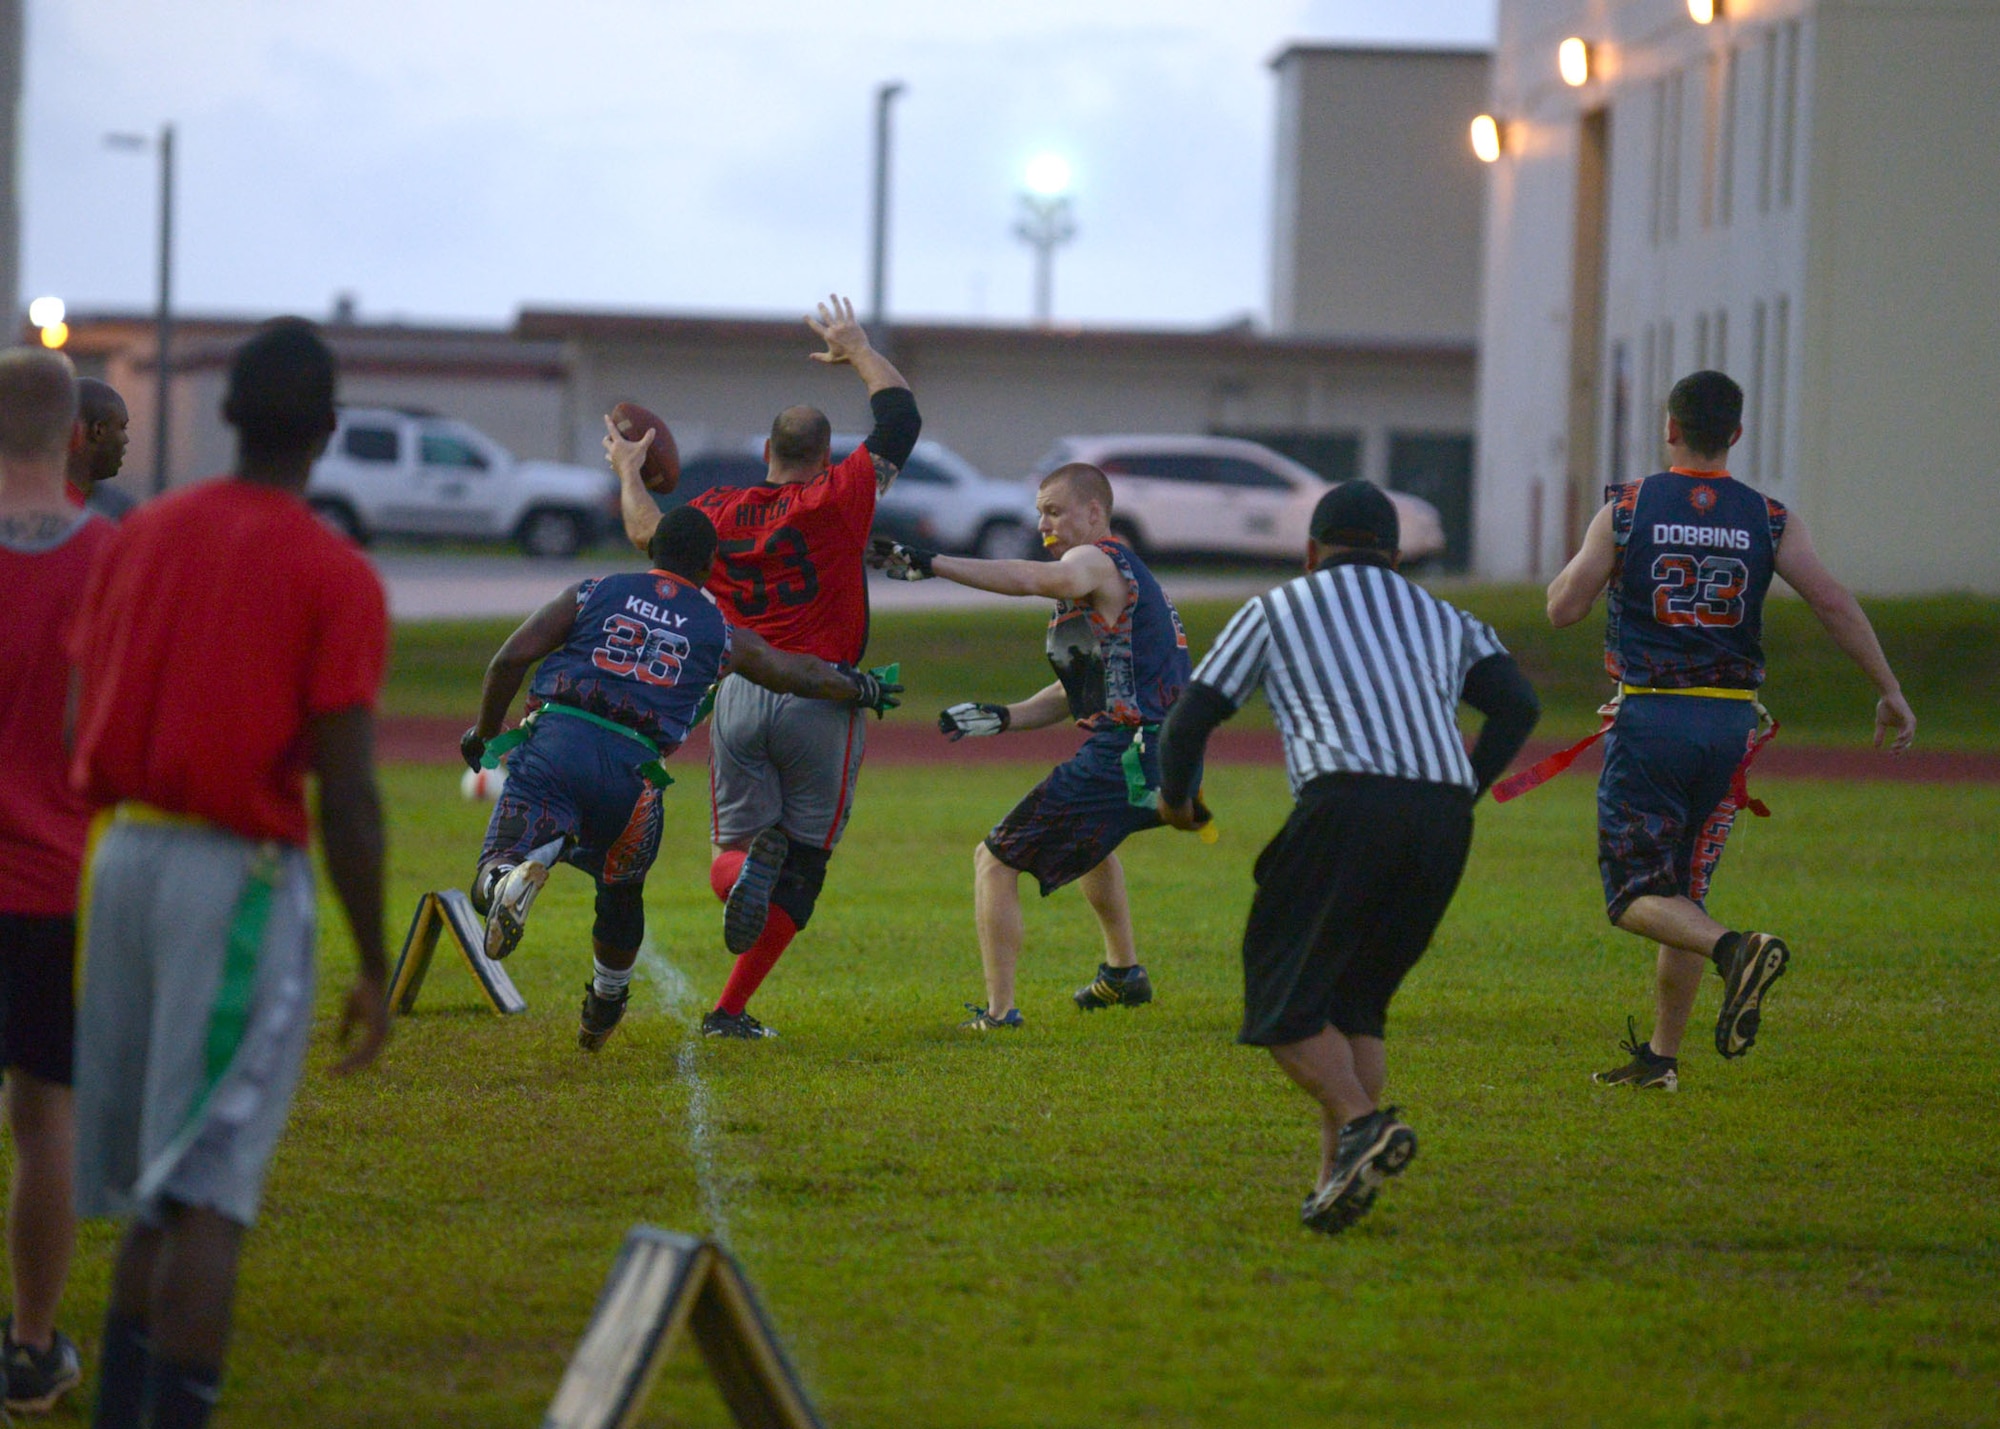 A 36th Security Forces Squadron member attempts to pull a flag from a 664th Combat Communications member as he tip-toes along the sideline during the flag football championship, April 20, 2015. The 36th SFS defeated the 664th CBCS 14-0 in the championship. (U.S. Air Force photo by Airman 1st Class Joshua Smoot/Released)